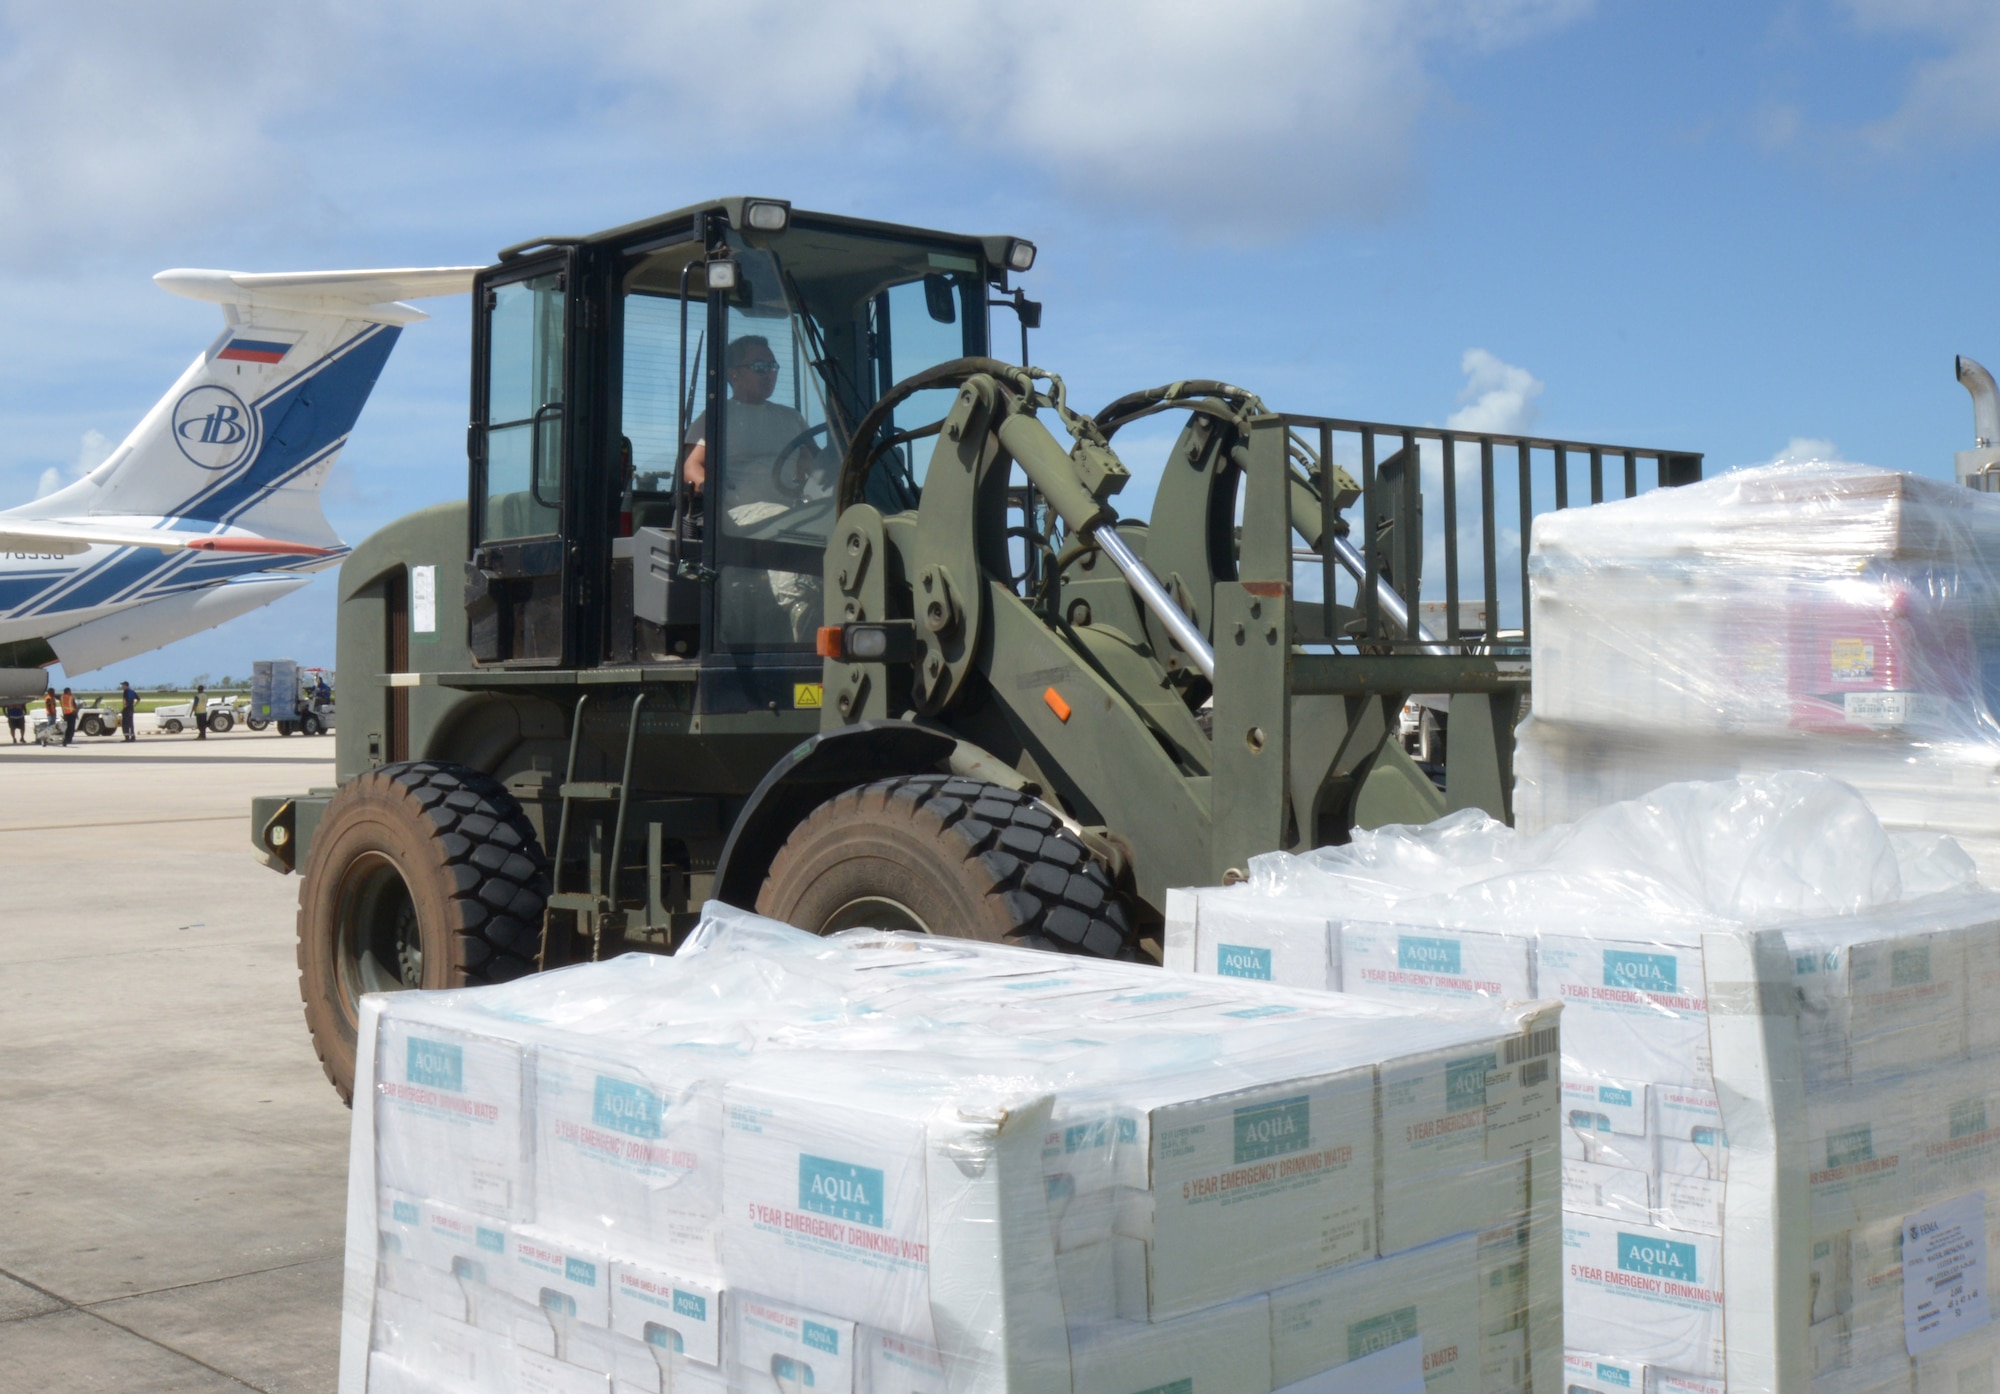 Senior Airman Louie Lascina, a native of Saipan, stages cases of water to be distributed to island residents as part of Typhoon Soudelor relief efforts. Airmen from the 36th Contingency Response Group deployed from Andersen Air Force Base to help the Federal Emergency Management Agency and Red Cross with transporting supplies through Saipan International Airport. (U.S. Navy photo by Mass Communication Specialist 3rd Class Kristina D. Marshall/Released)